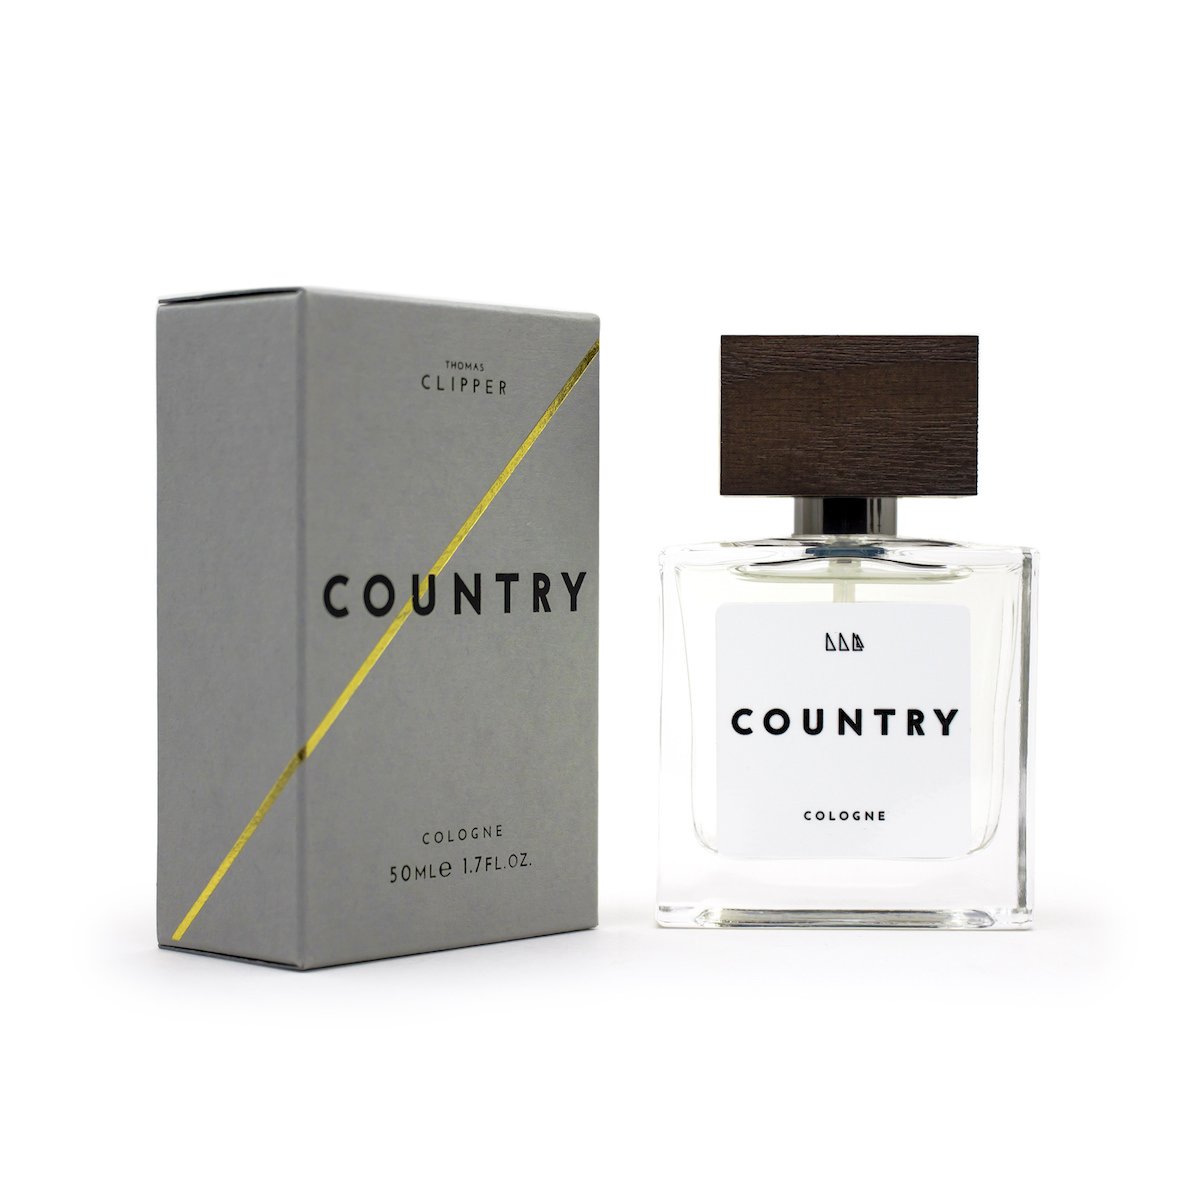 Country - 50ml Cologne - Thomas Clipper